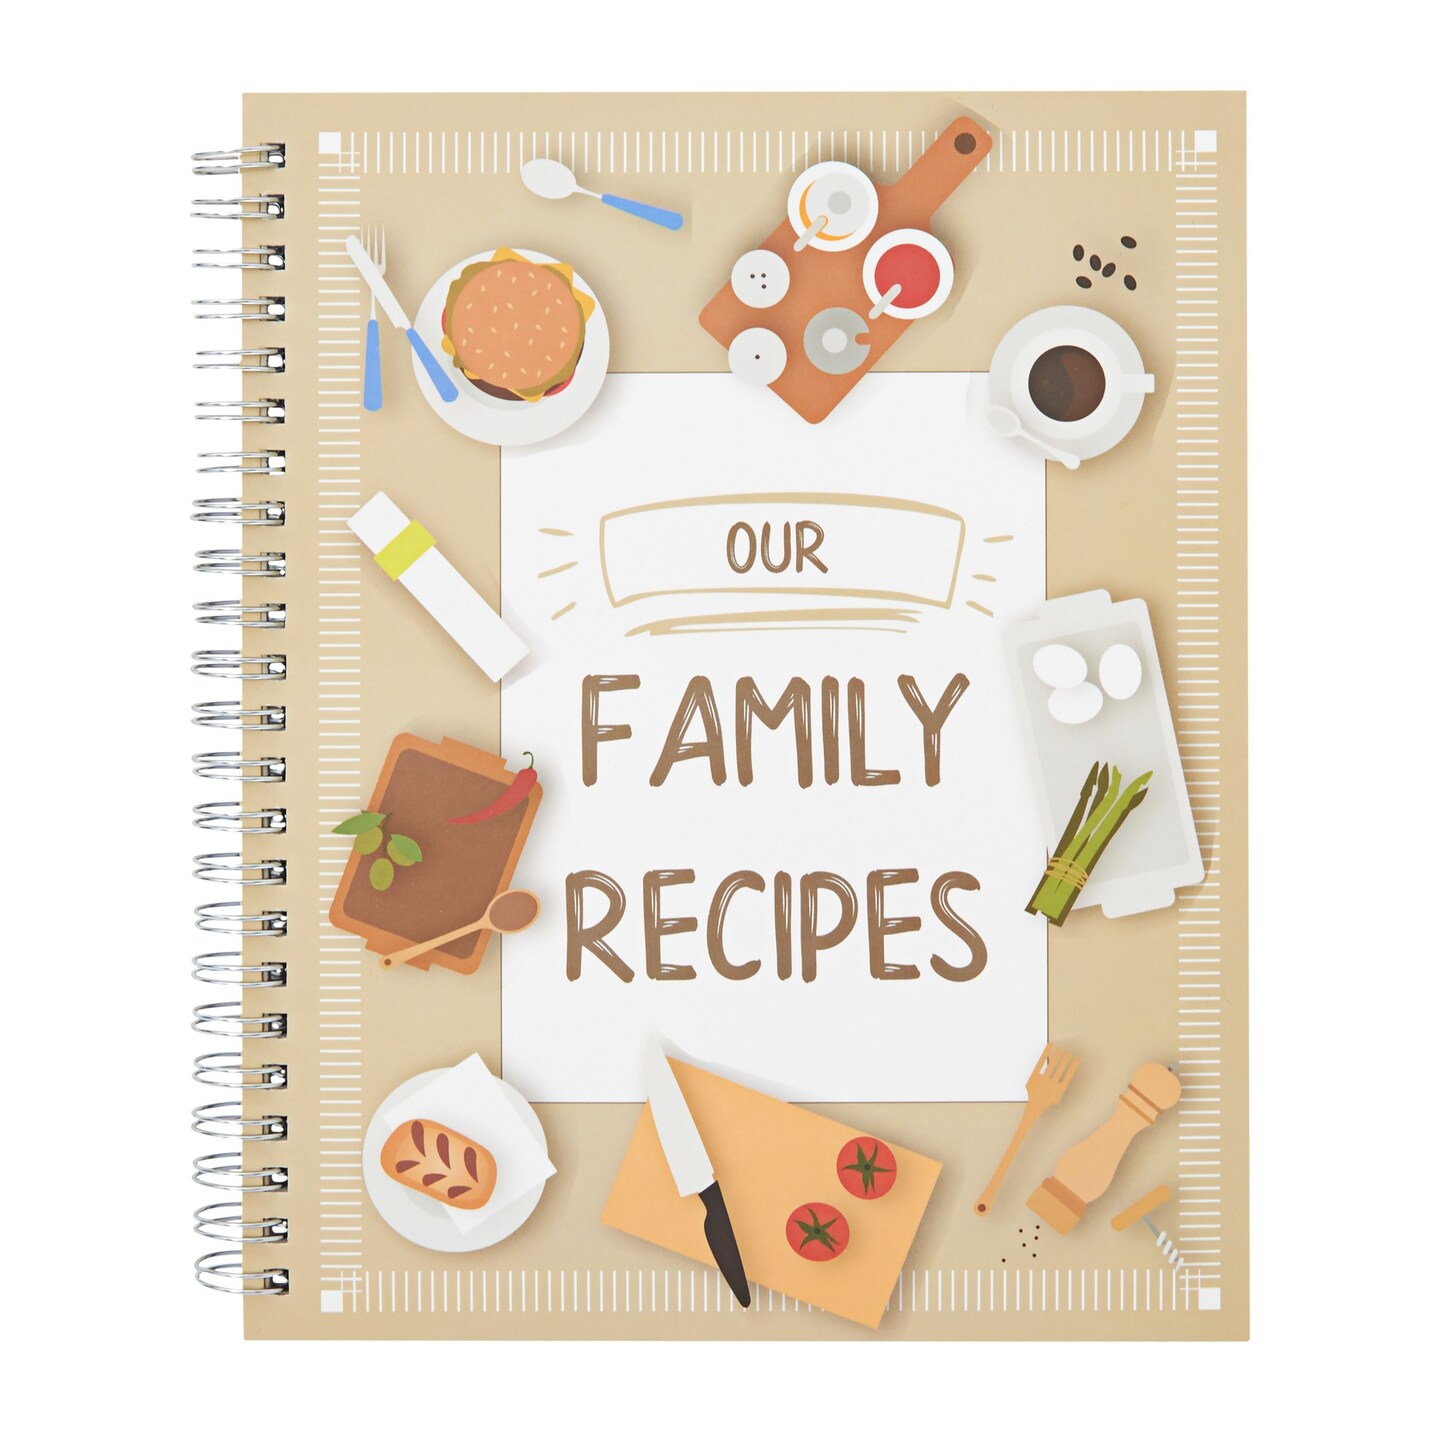 My Holiday Recipe Book: Recipe Book To Write In Your Own Recipes: Blank  Recipe Book, Blank Cookbook, Cook Books To Write In, Recipe Notebook,  Family Recipe Book, Empty Cookbook For Recipes by